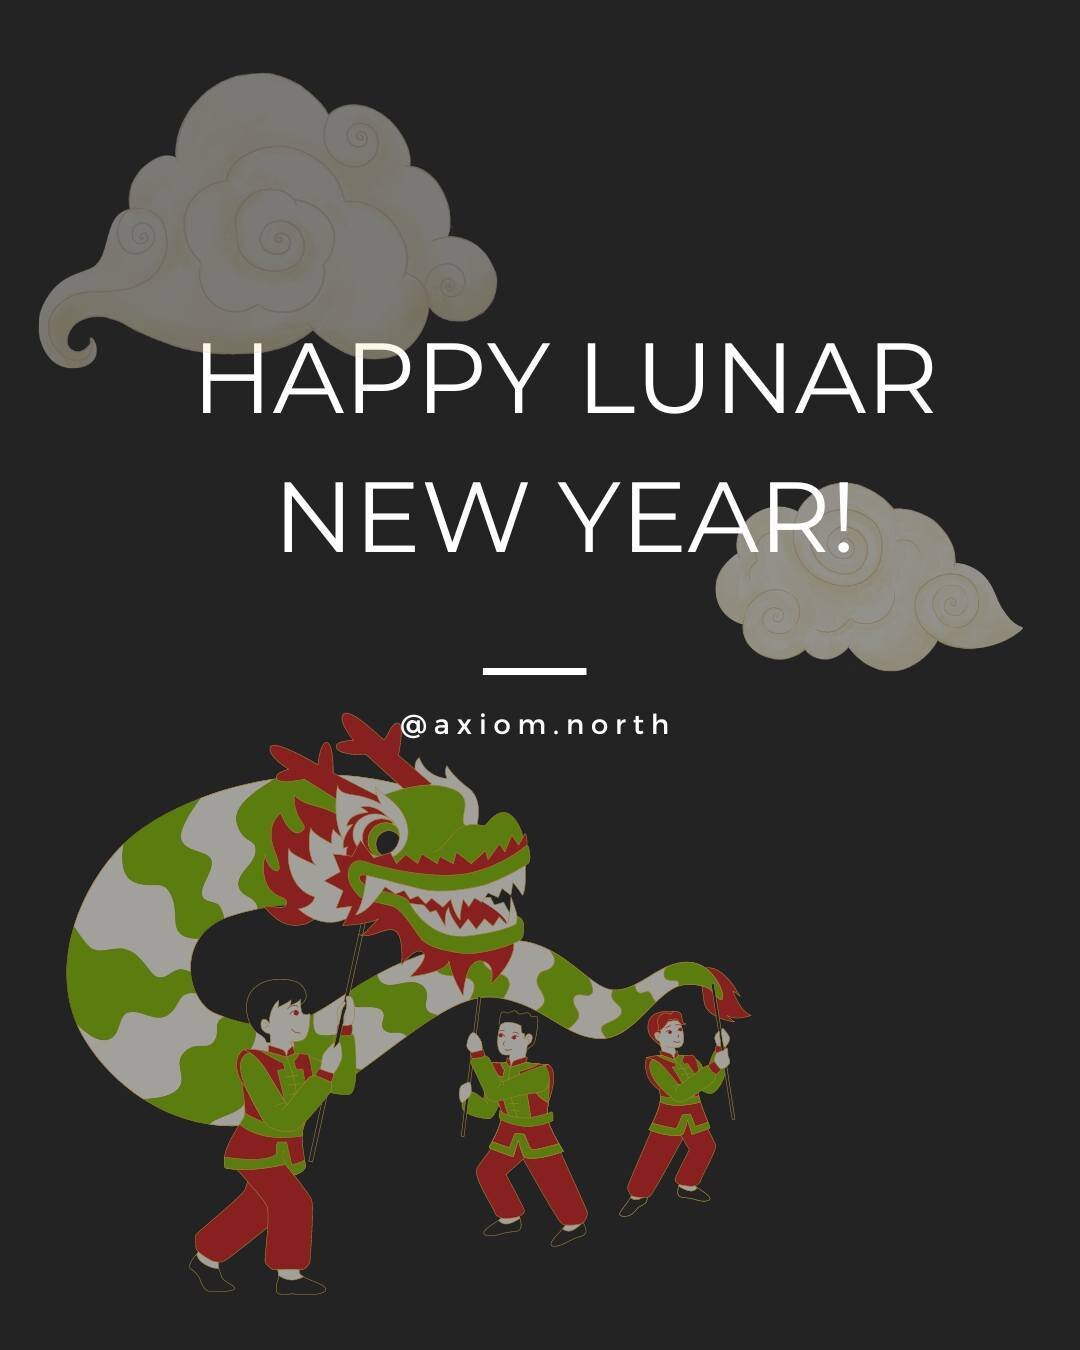 Happy Lunar New Year!

As we welcome the Year of the #Dragon, let's embrace new opportunities and fresh starts. May this year bring you abundant happiness, success, and positive energy.

#AxiomMortgageSolutions #TheAxiomAdvantage #LunarNewYear #YearO